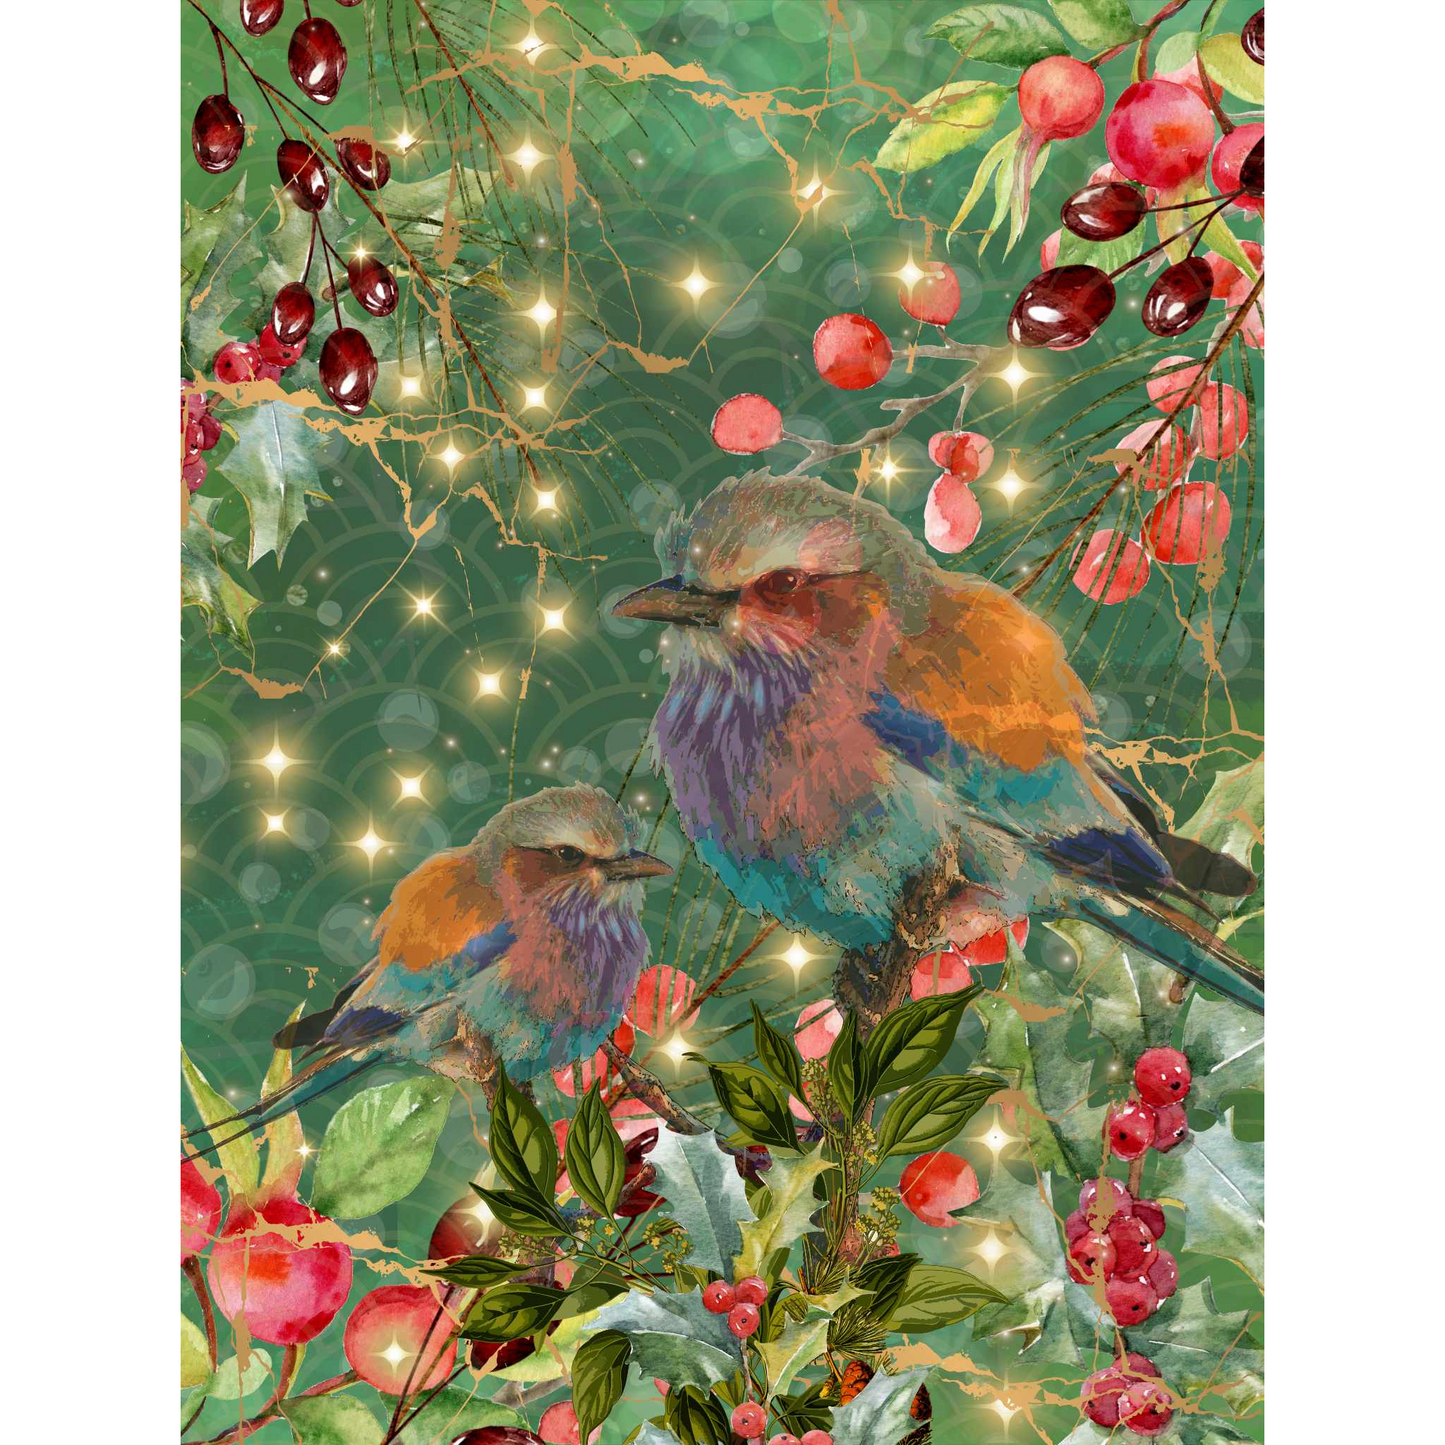 "Christmas Tweetings" 3 sheet decoupage paper set by Made by Marley. Sheet 2 of 3. Available at Milton's Daughter.